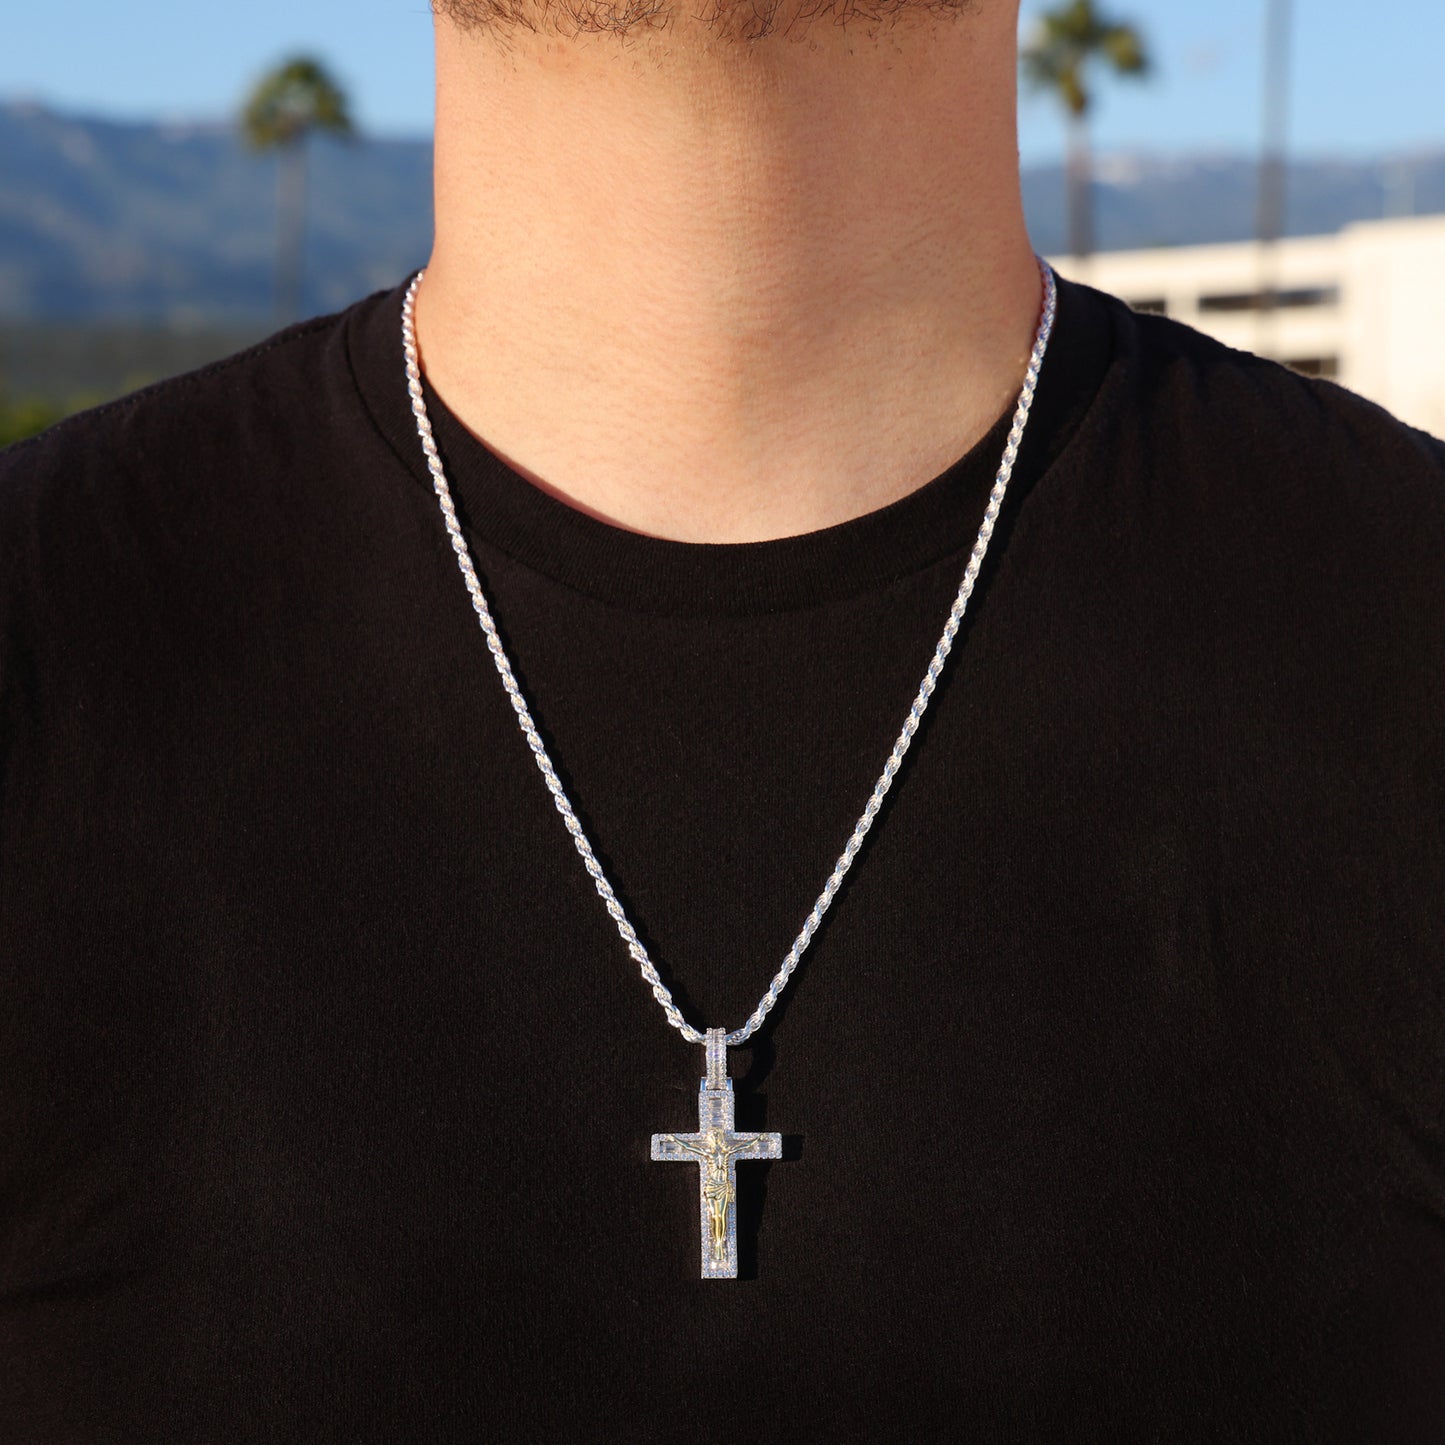 Iced Baguette Crucifix Pendant (2 Tone) - Real 925 Silver